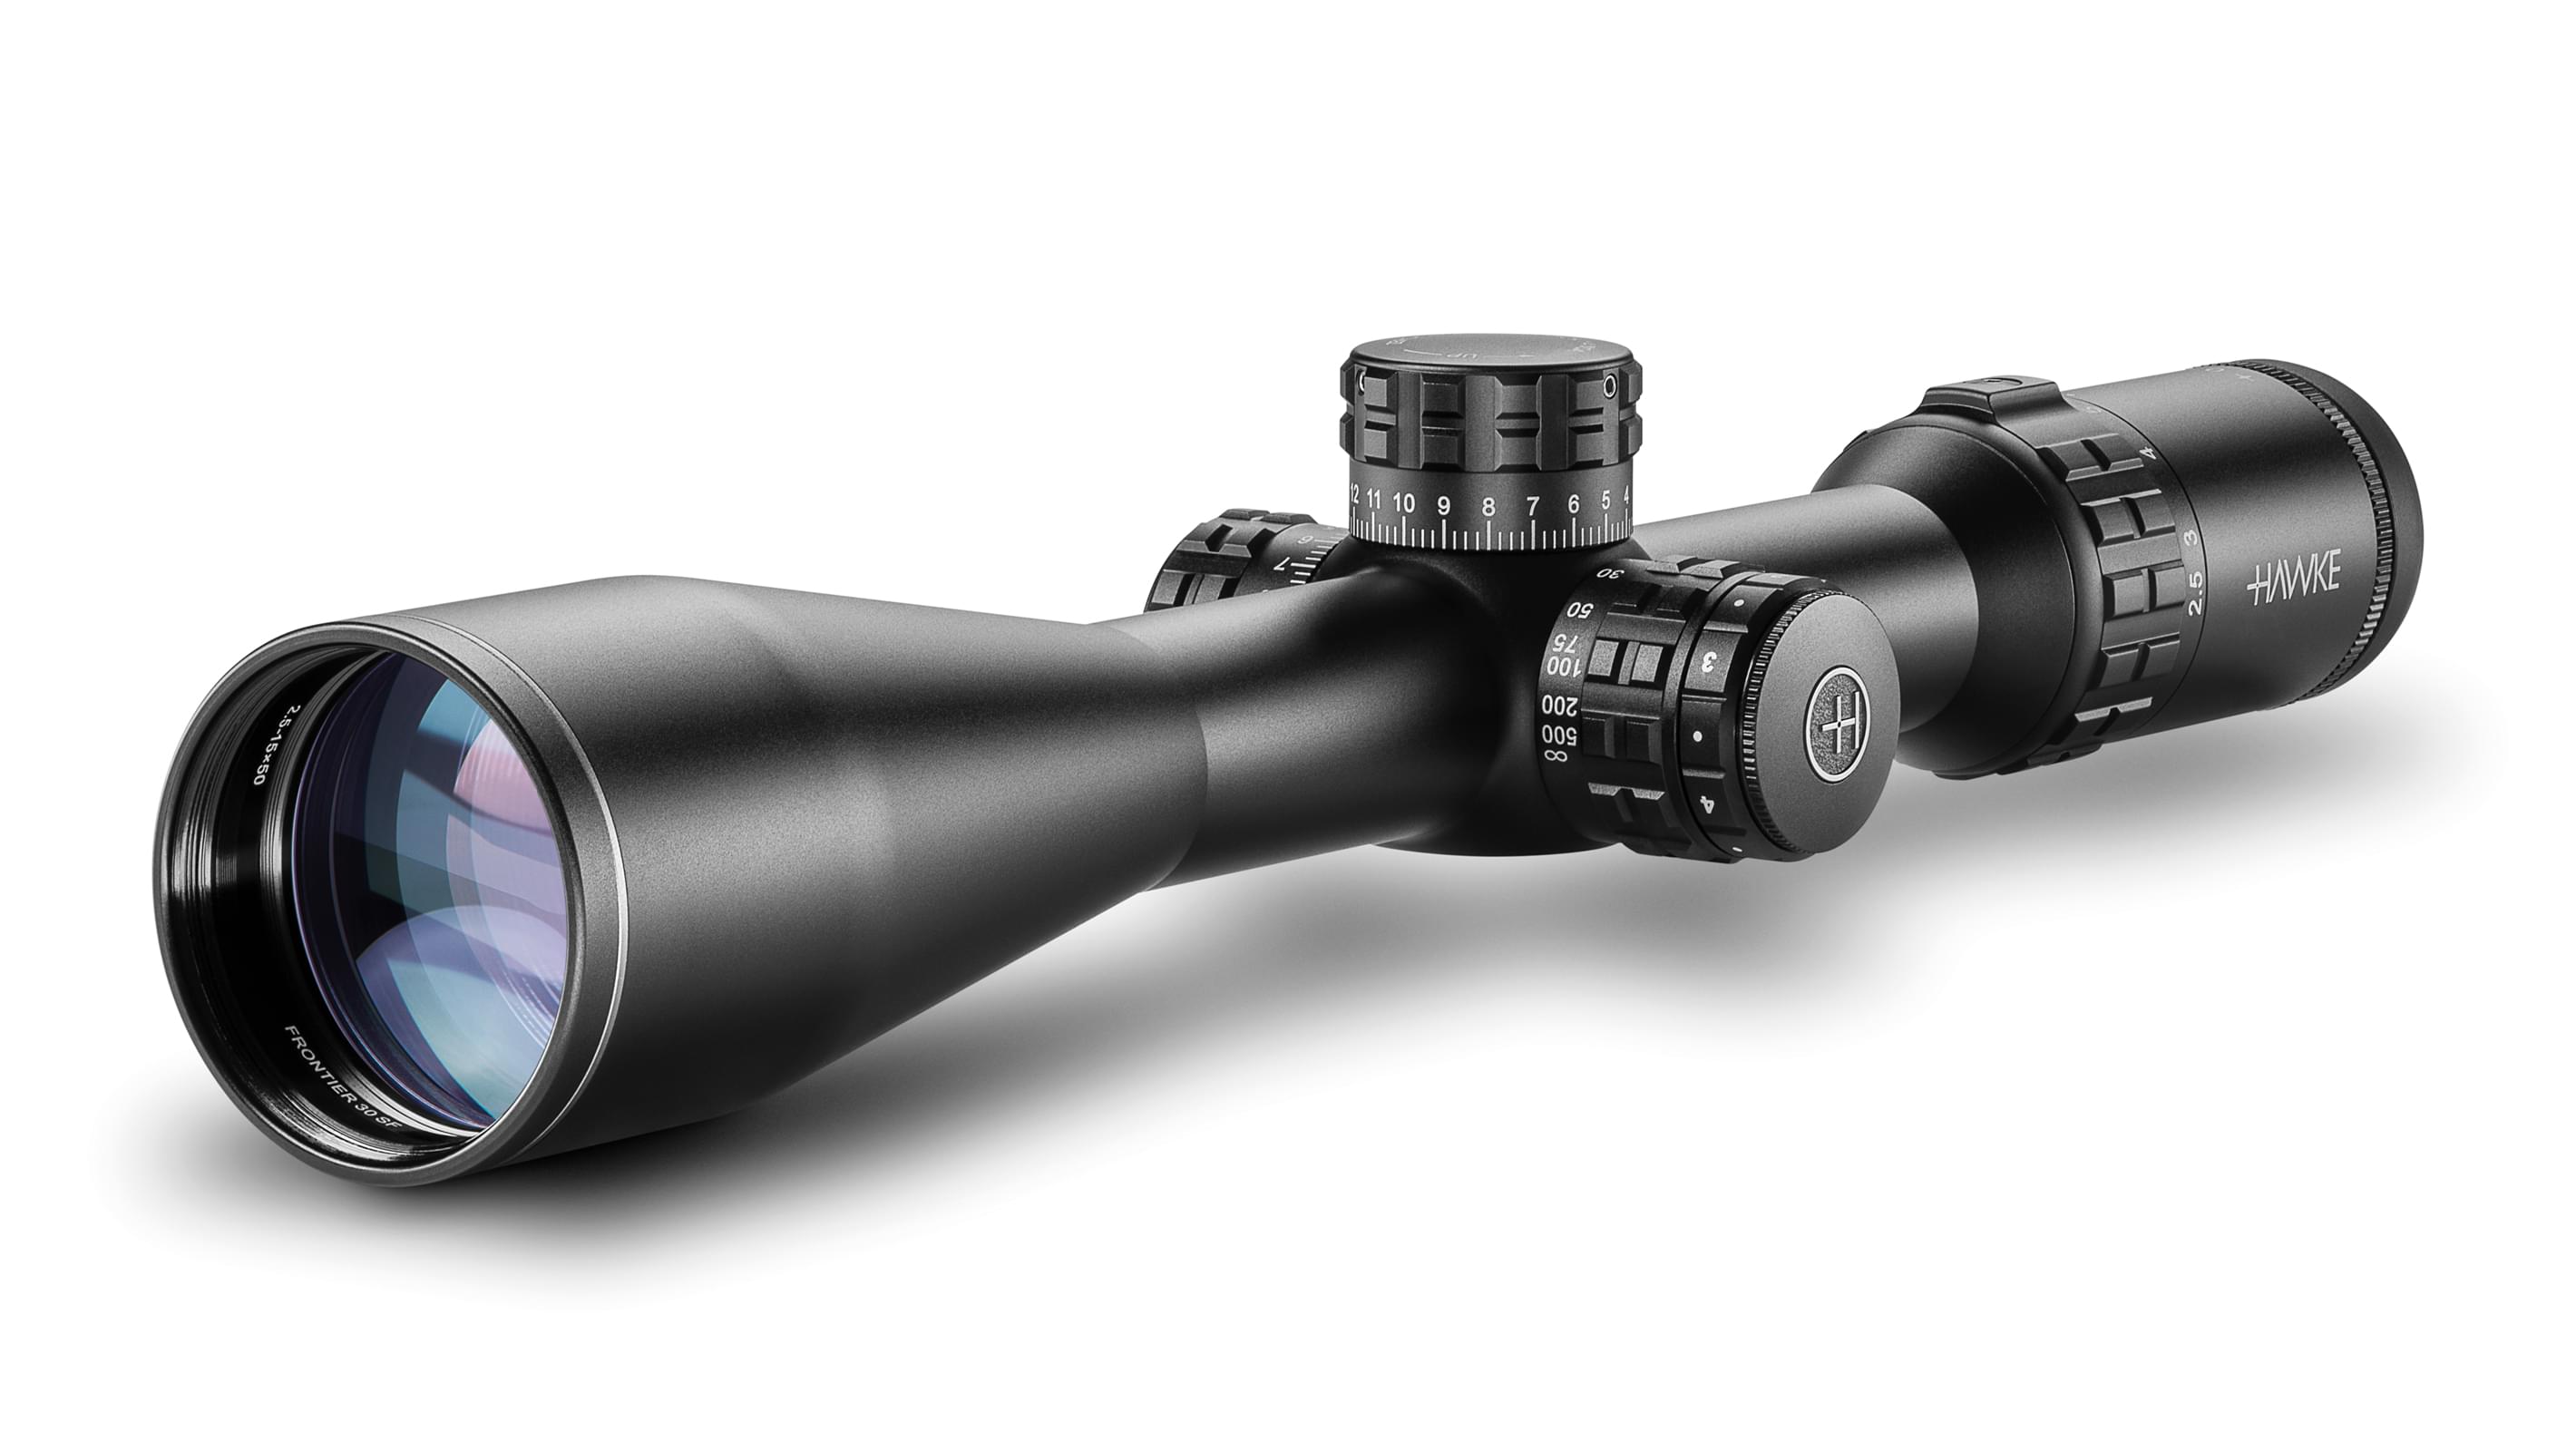 FRONTIER 30 SF 2.5-15x50 LR DOT RETICLE